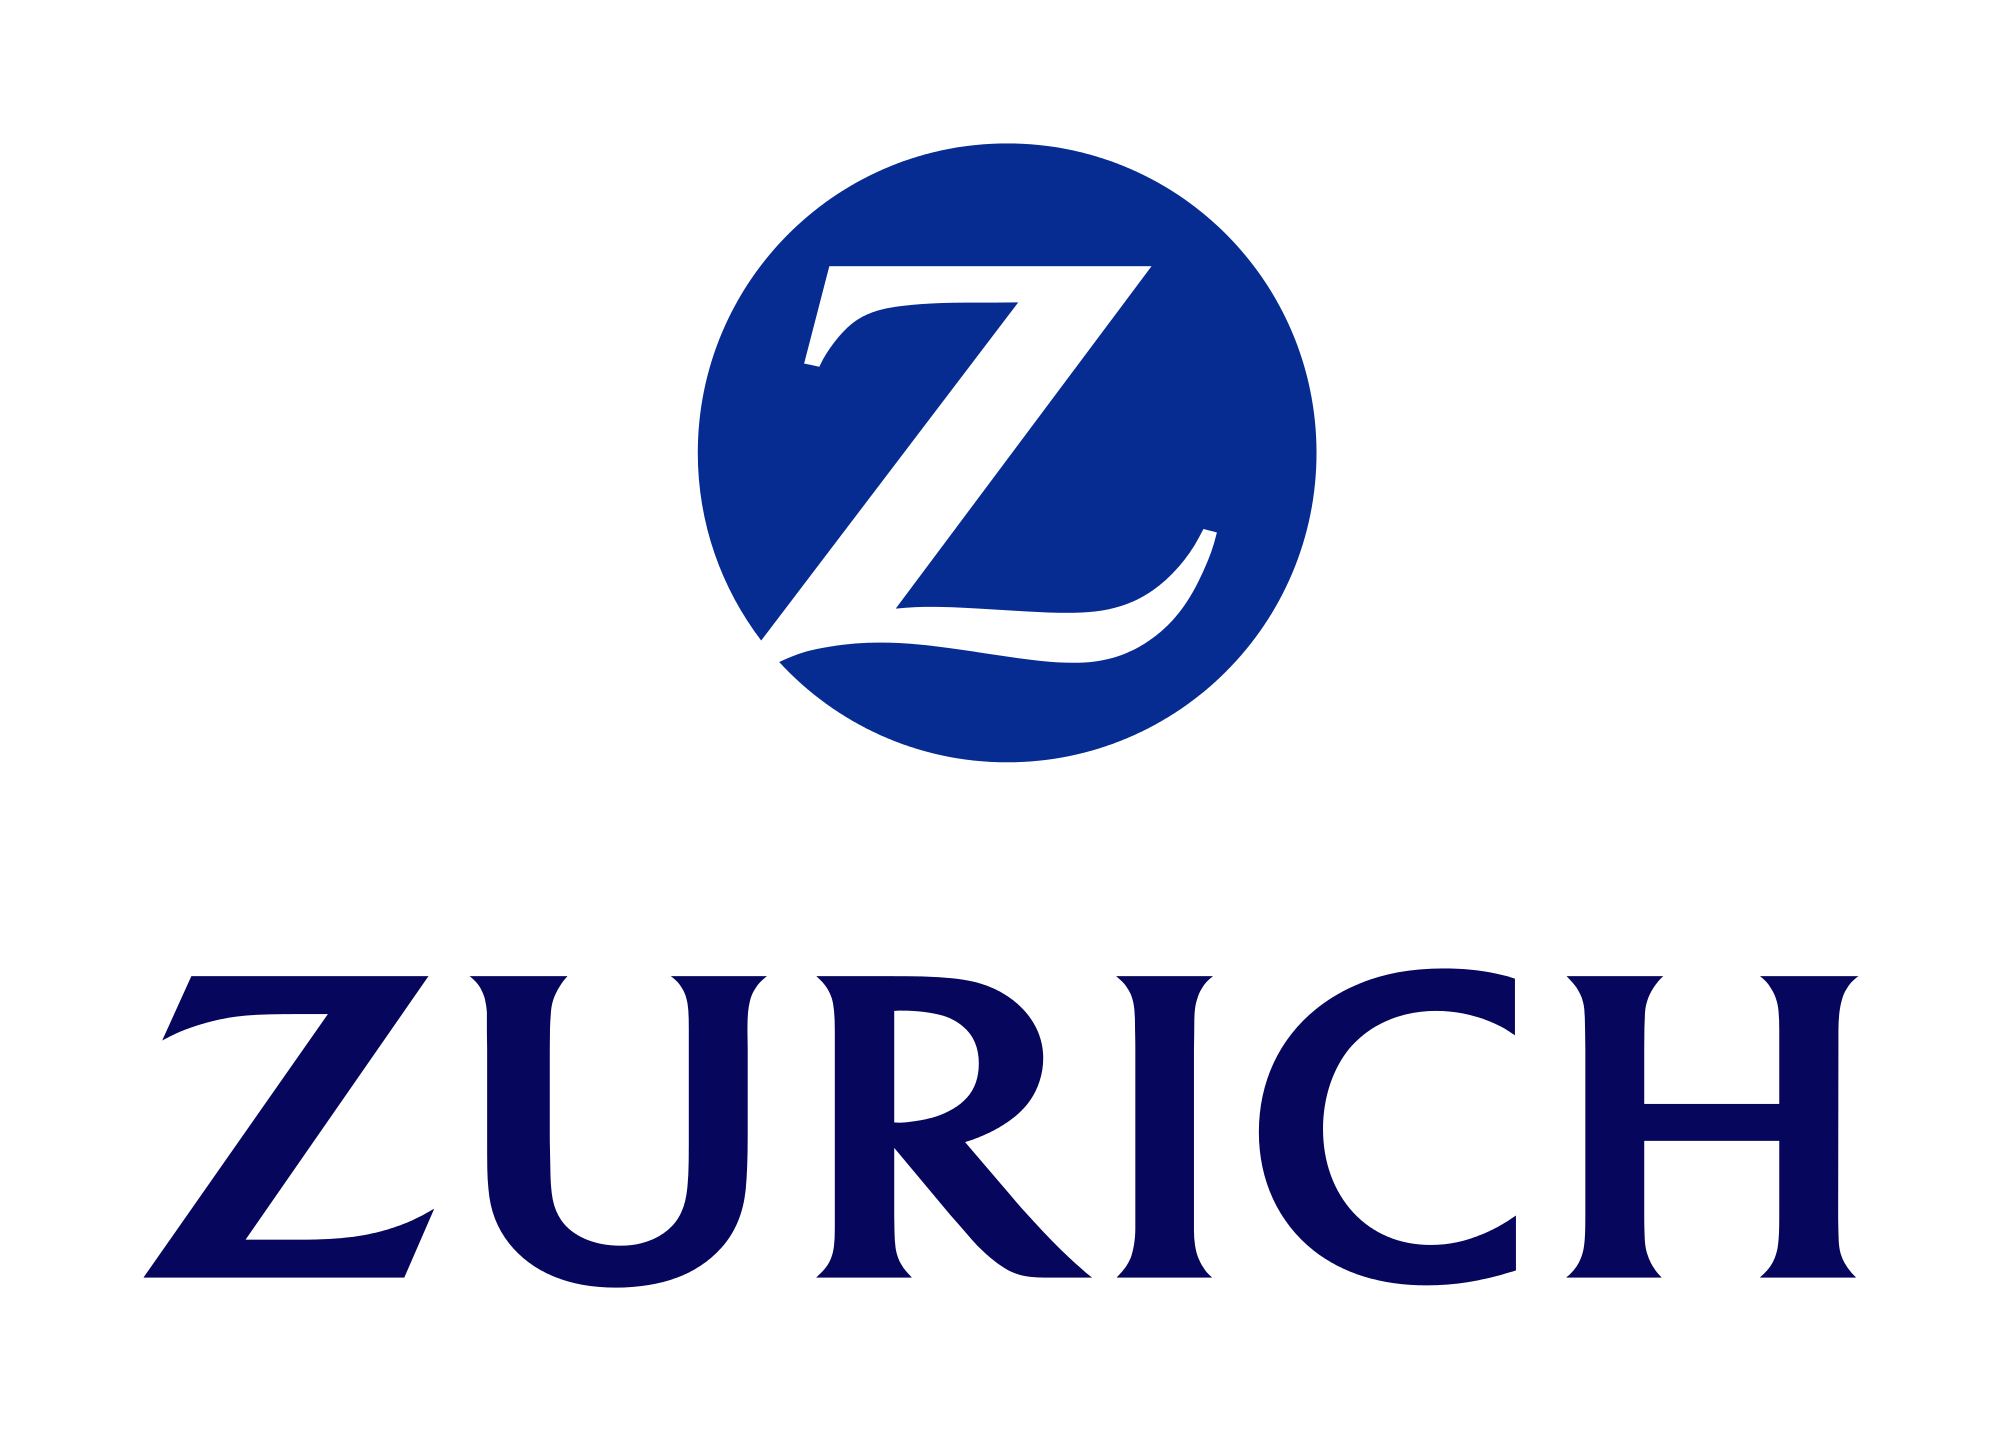 Zurich recorded 14% premium growth with a 7% change in the first quarter of the year